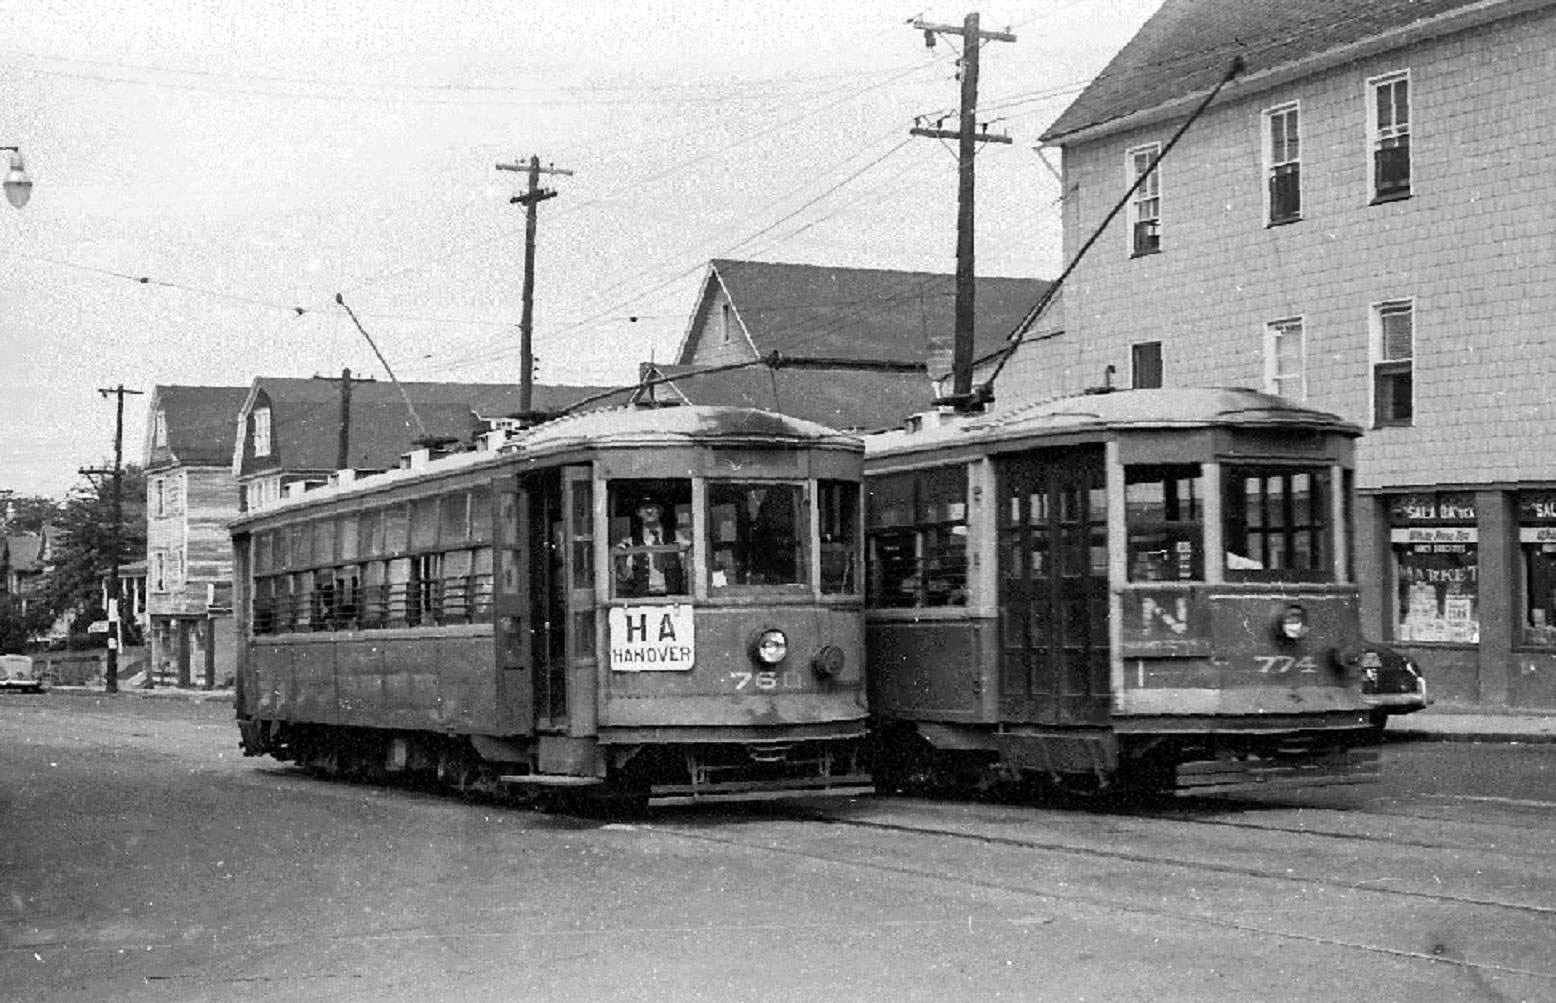 Wilkes Barre Railway Cars 760 and 774